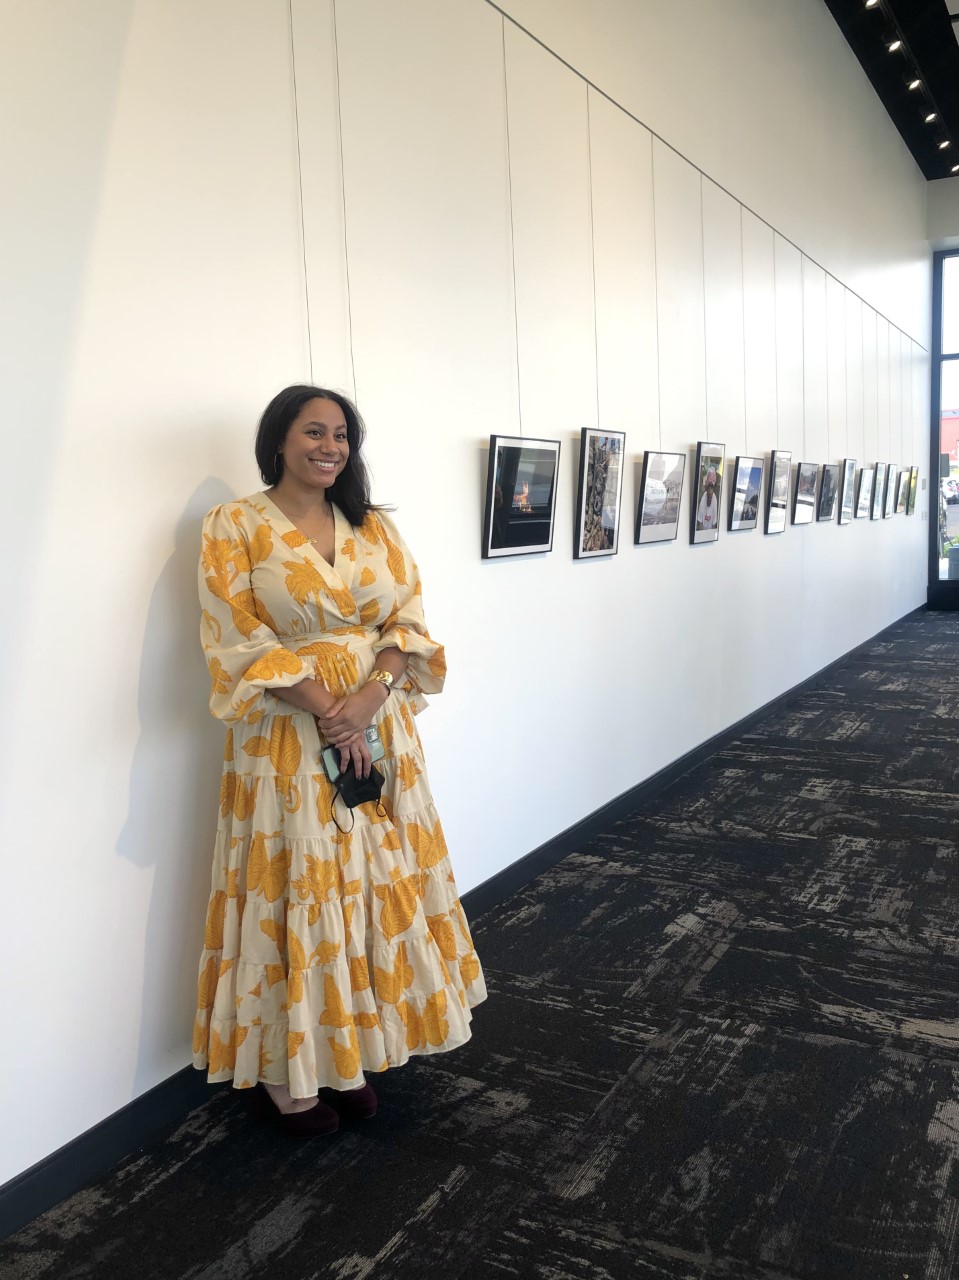 photographer Asha Belk standing in a gallery with her work